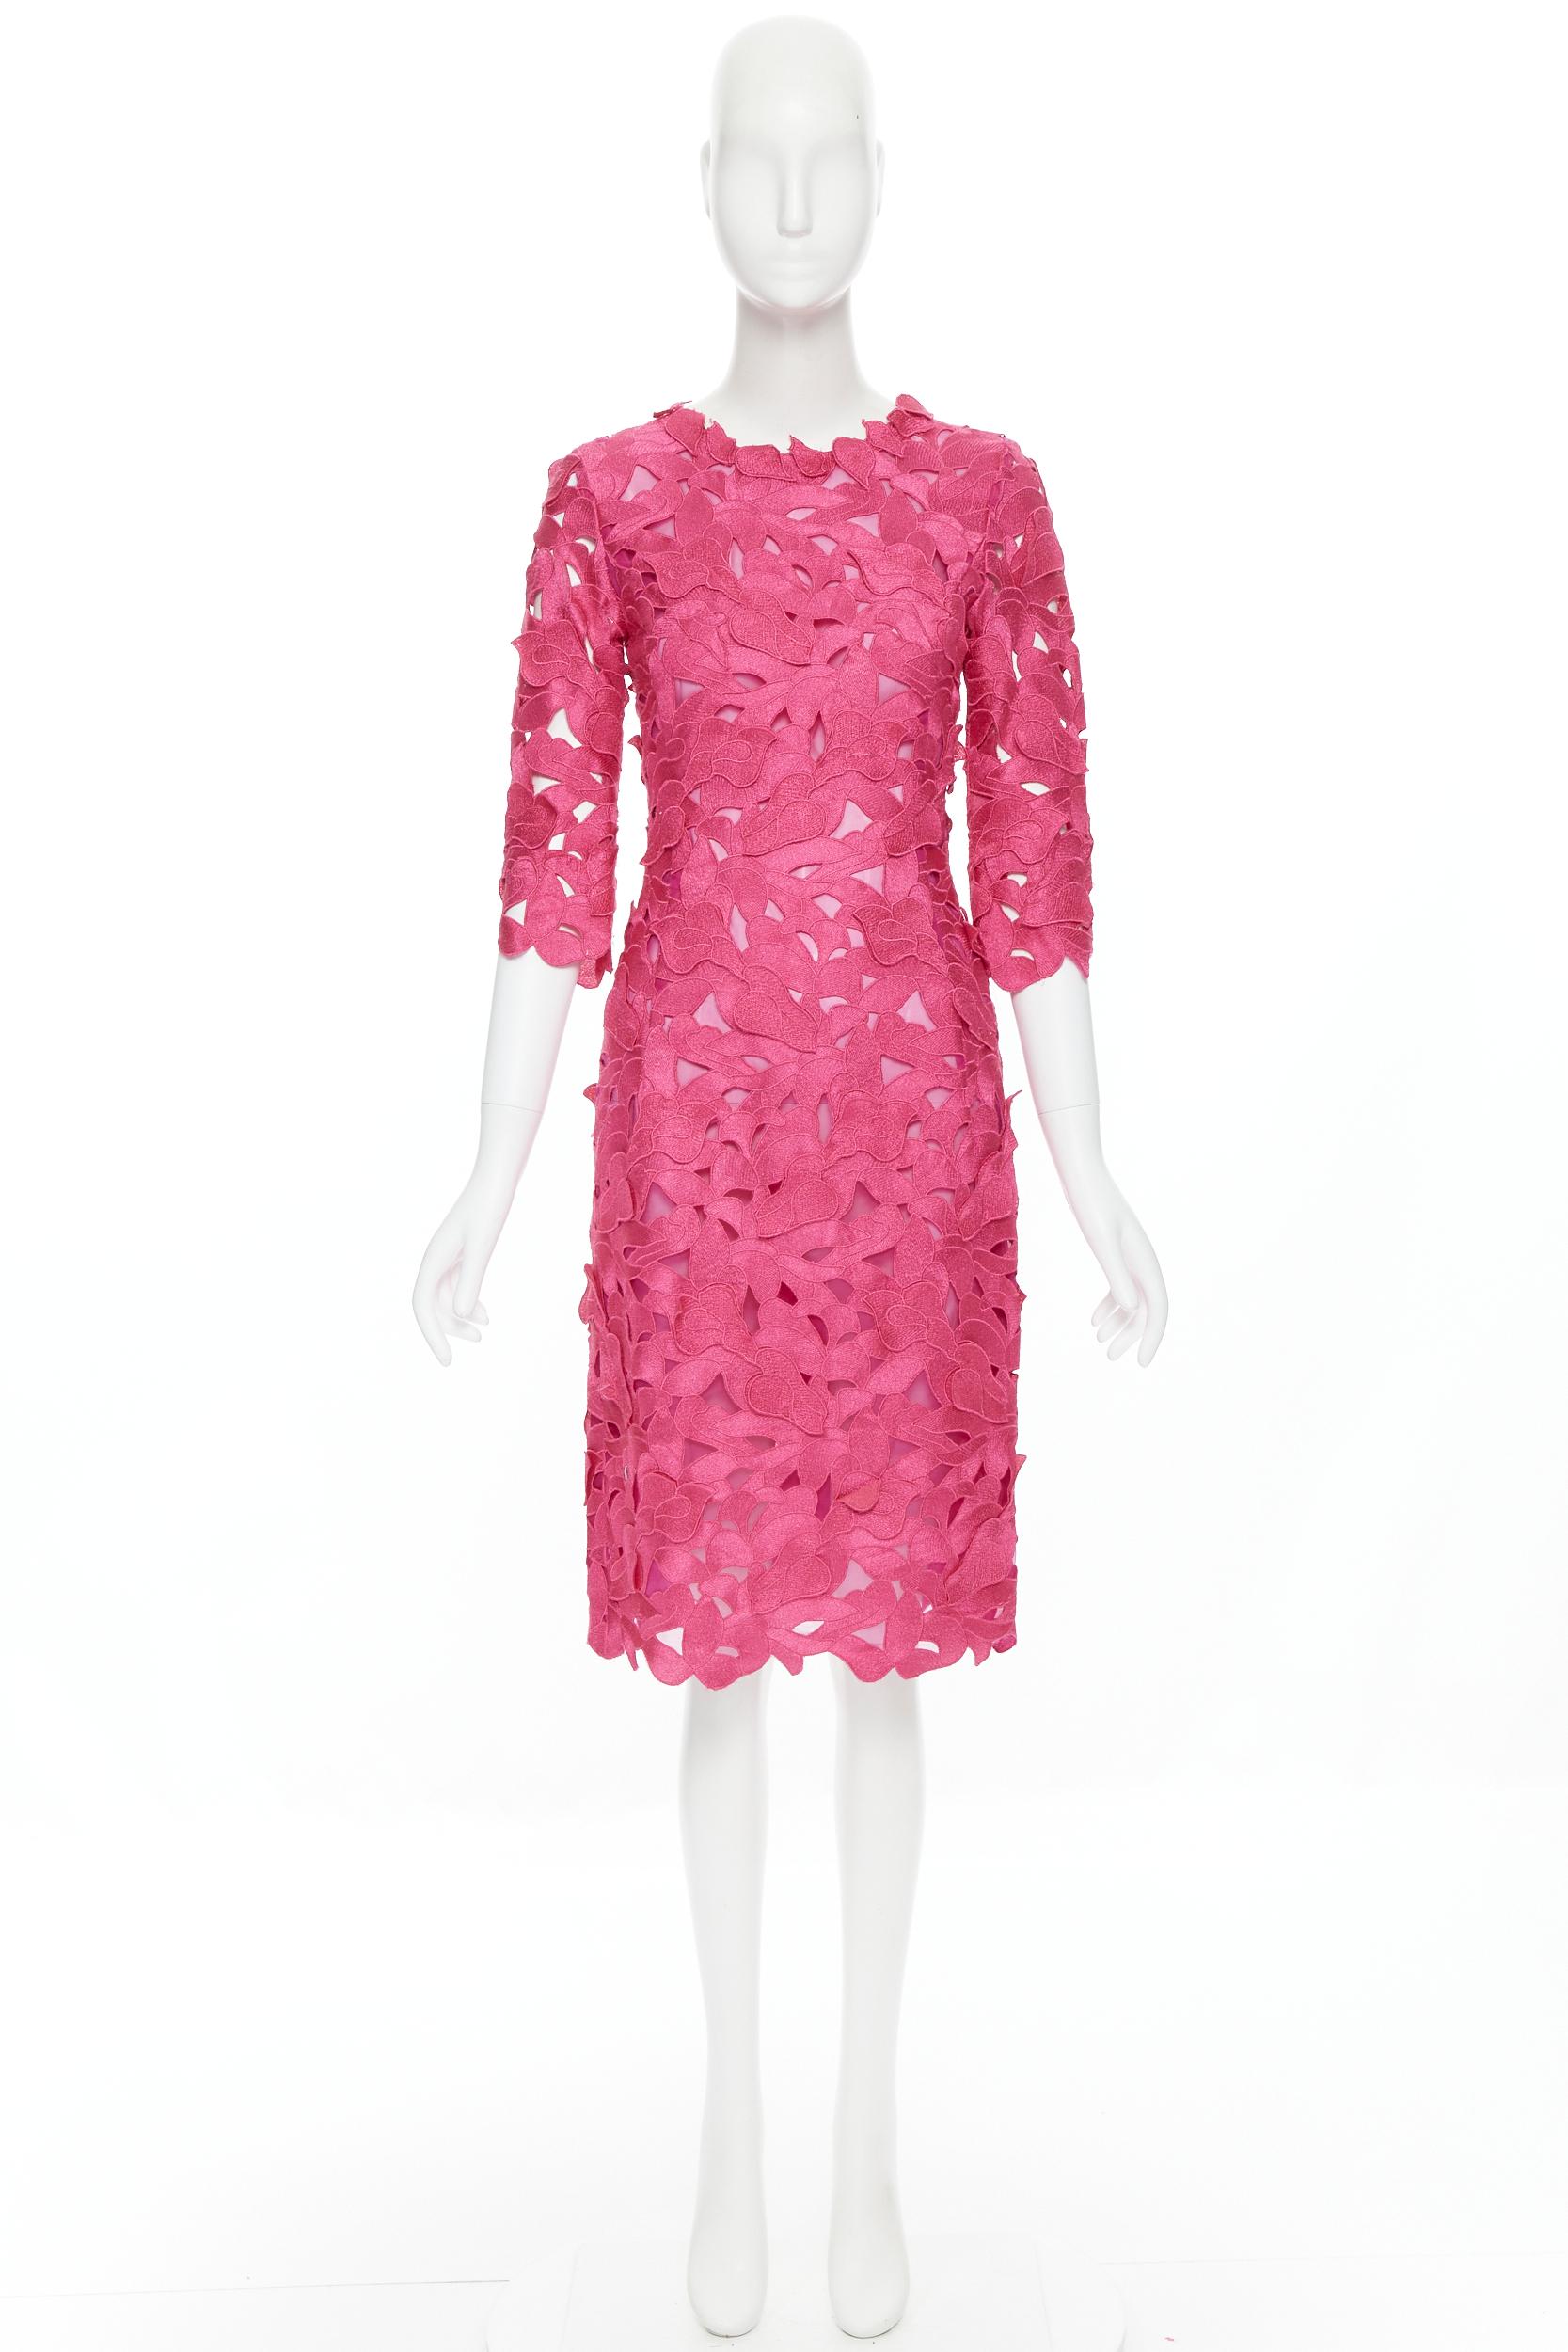 OSCAR DE LA RENTA fuchsia pink floral print 3/4 sleeve cocktail dress XS 
Reference: LNKO/A01745 
Brand: Oscar De La Renta 
Designer: Oscar De La Renta 
Material: Unknown 
Color: Pink 
Pattern: Floral 
Closure: Zip 
Extra Detail: Embroidery floral